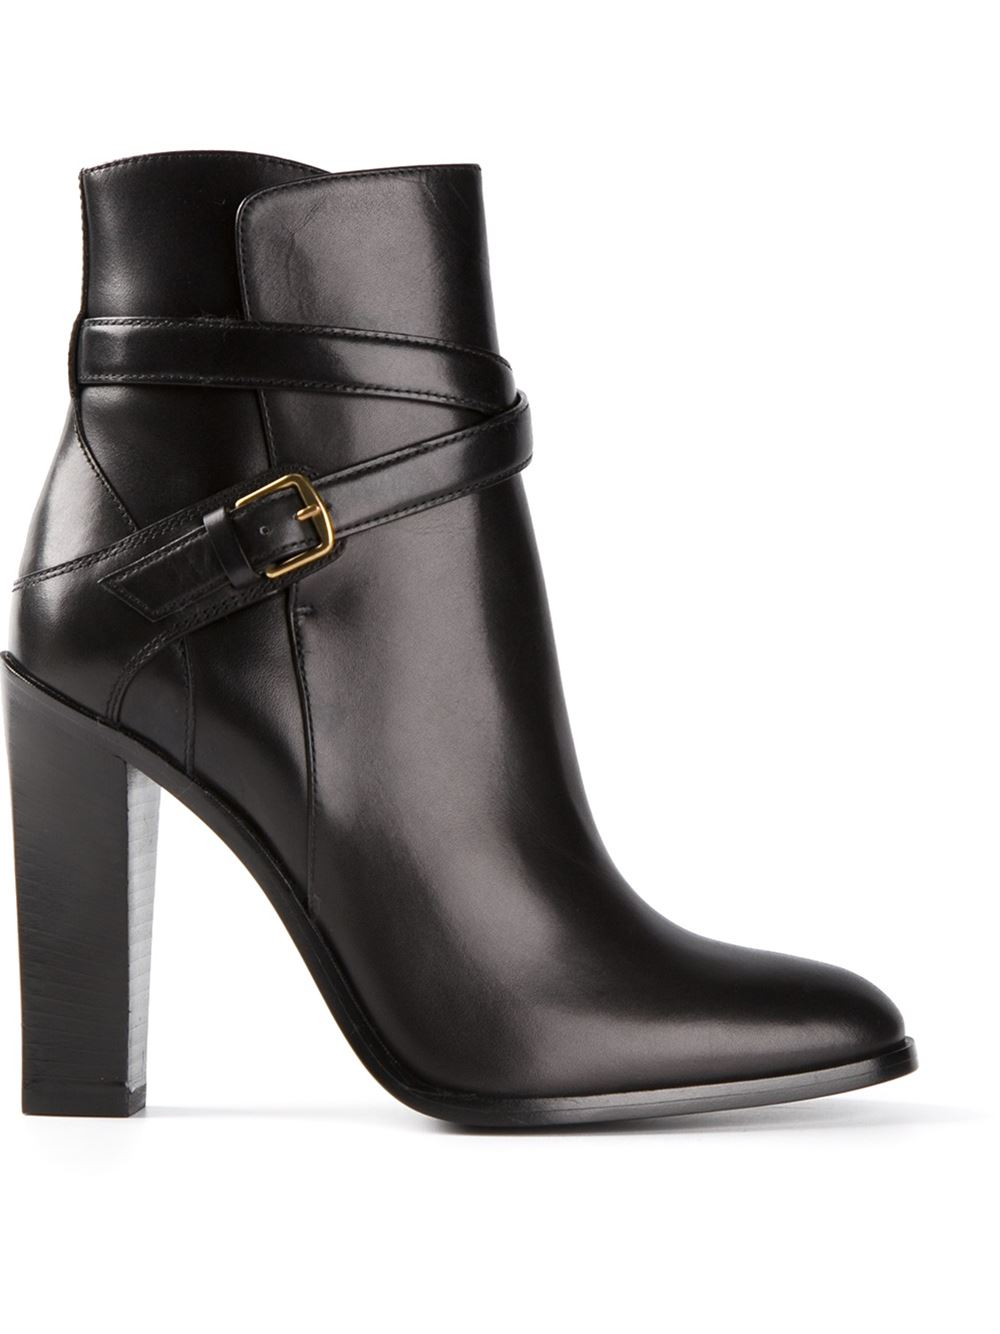 Lyst - Saint Laurent 'Hunting 105' Ankle Boots in Black